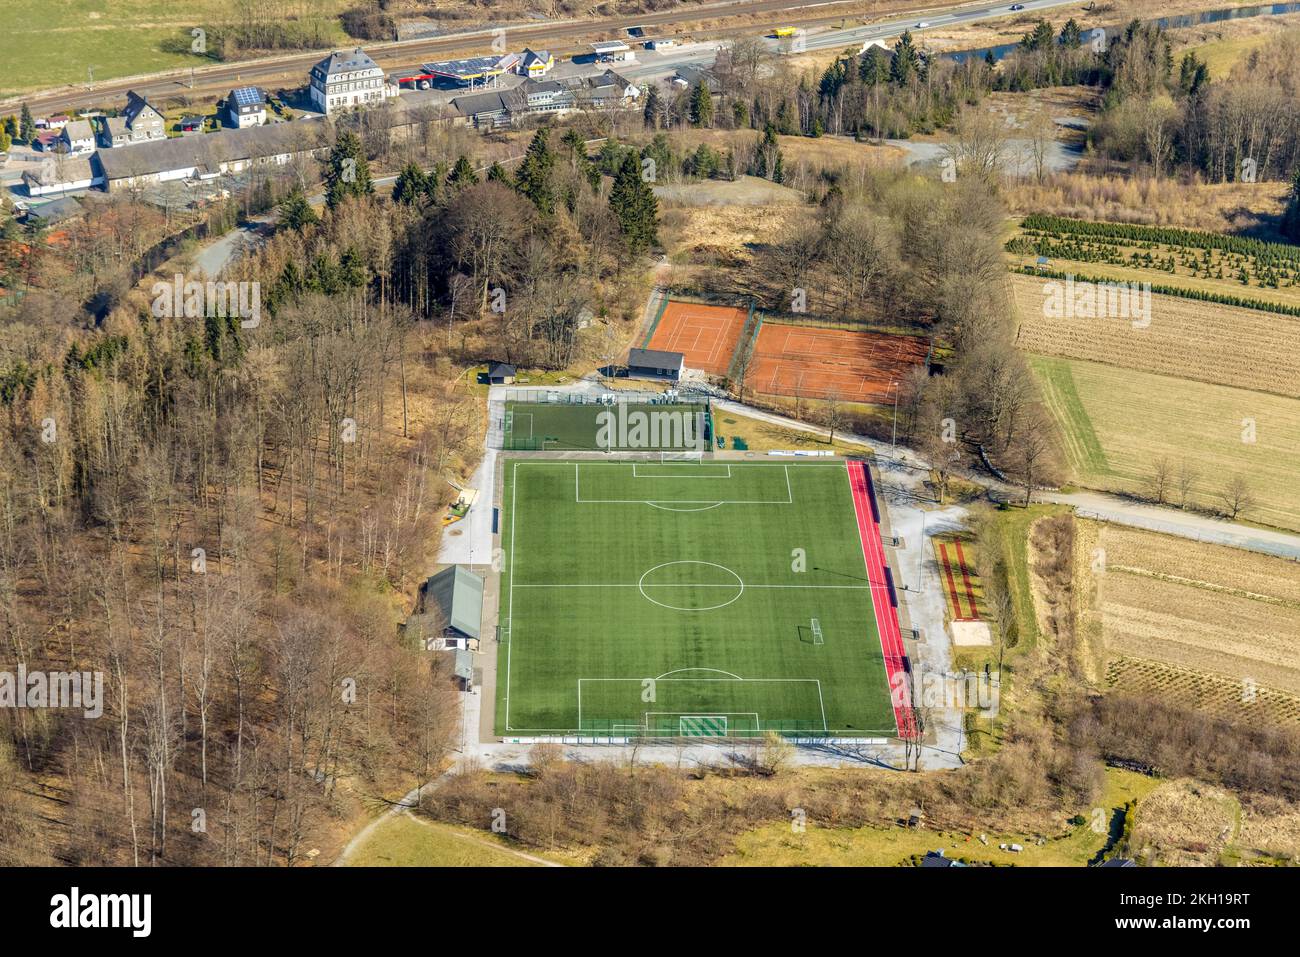 Aerial view, Ostwig sports field and tennis courts in Bestwig, Sauerland, North Rhine-Westphalia, Germany Stock Photo